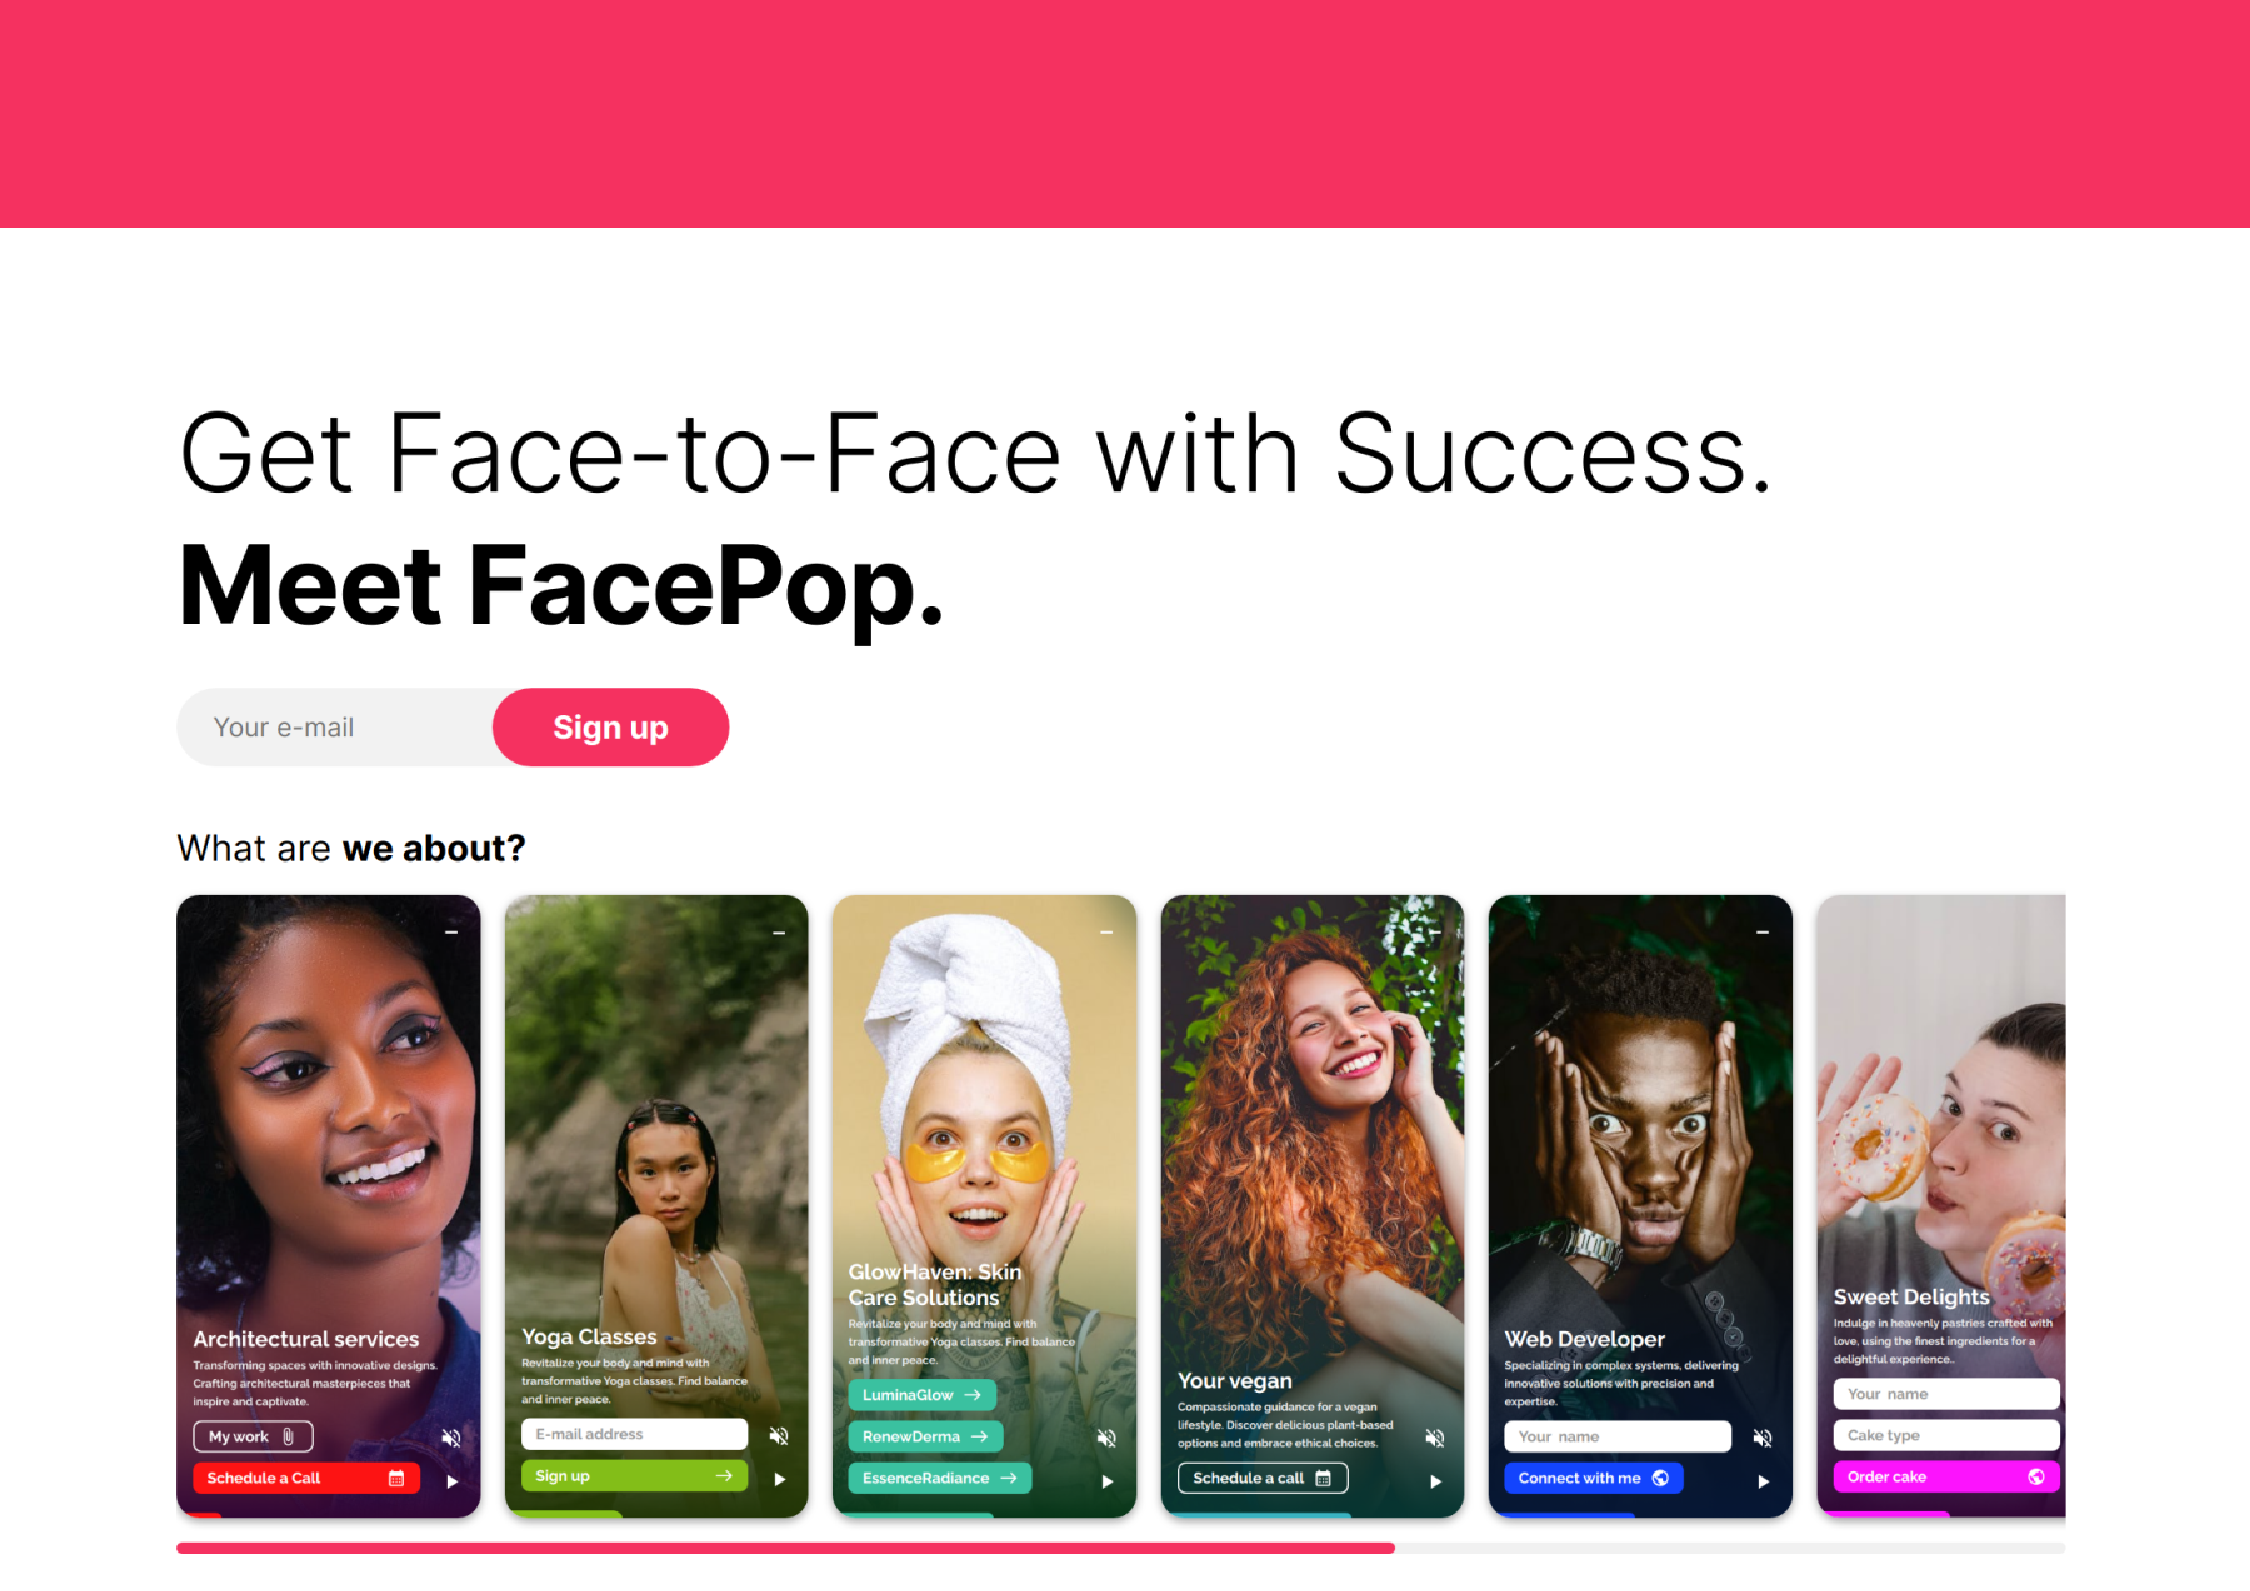 FacePop - Get Face-to-Face with Success